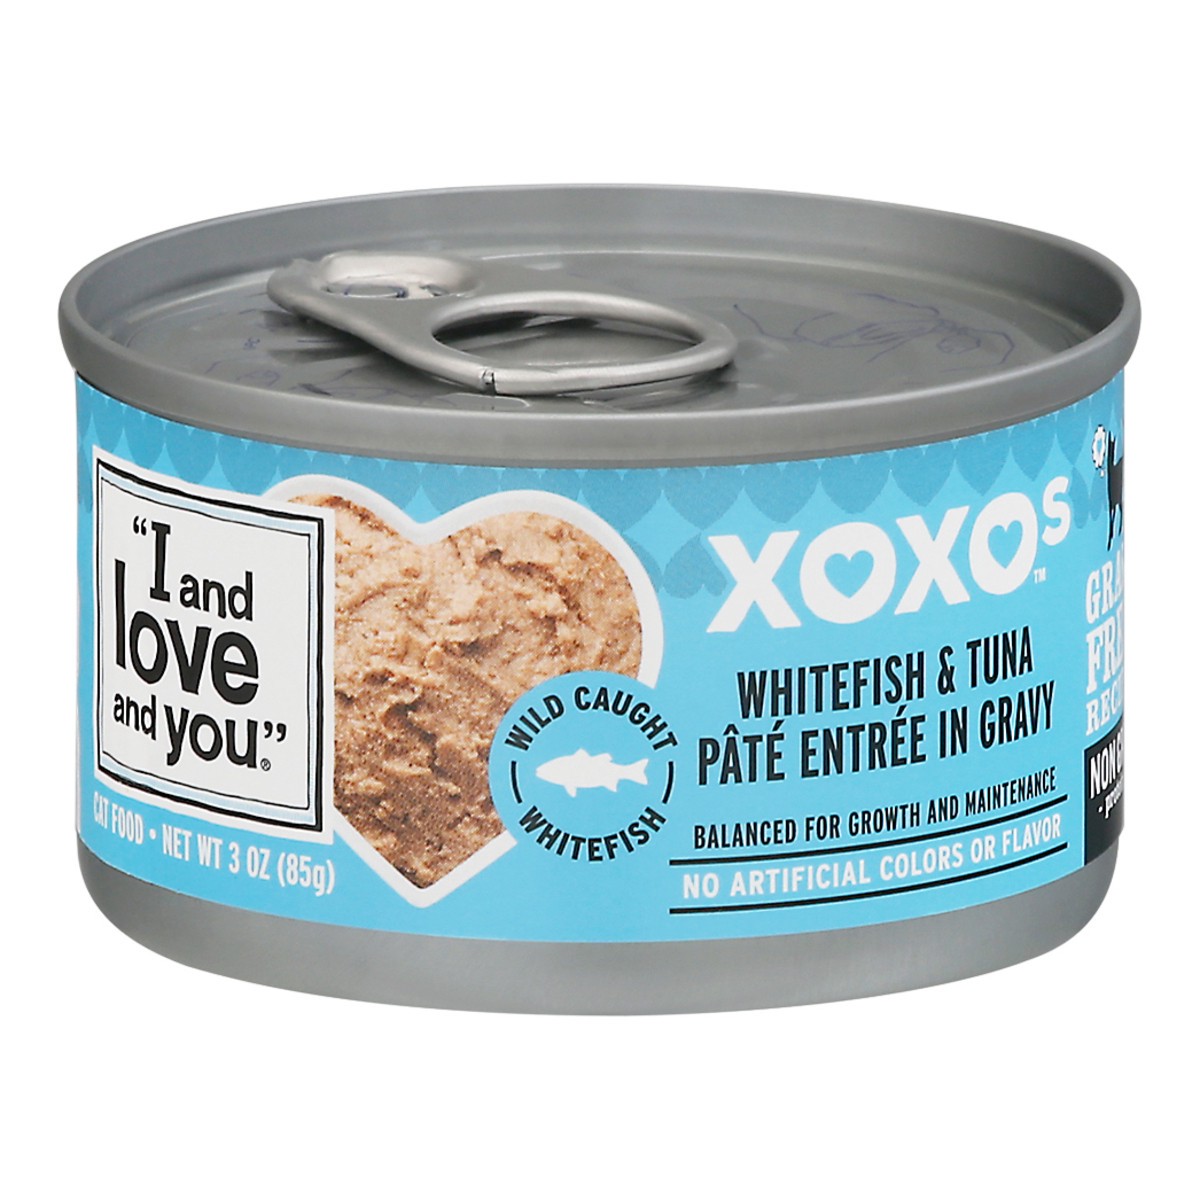 slide 1 of 1, I and Love and You XOXOs White Fish & Tuna Wet Cat Food - 3oz, 3 oz